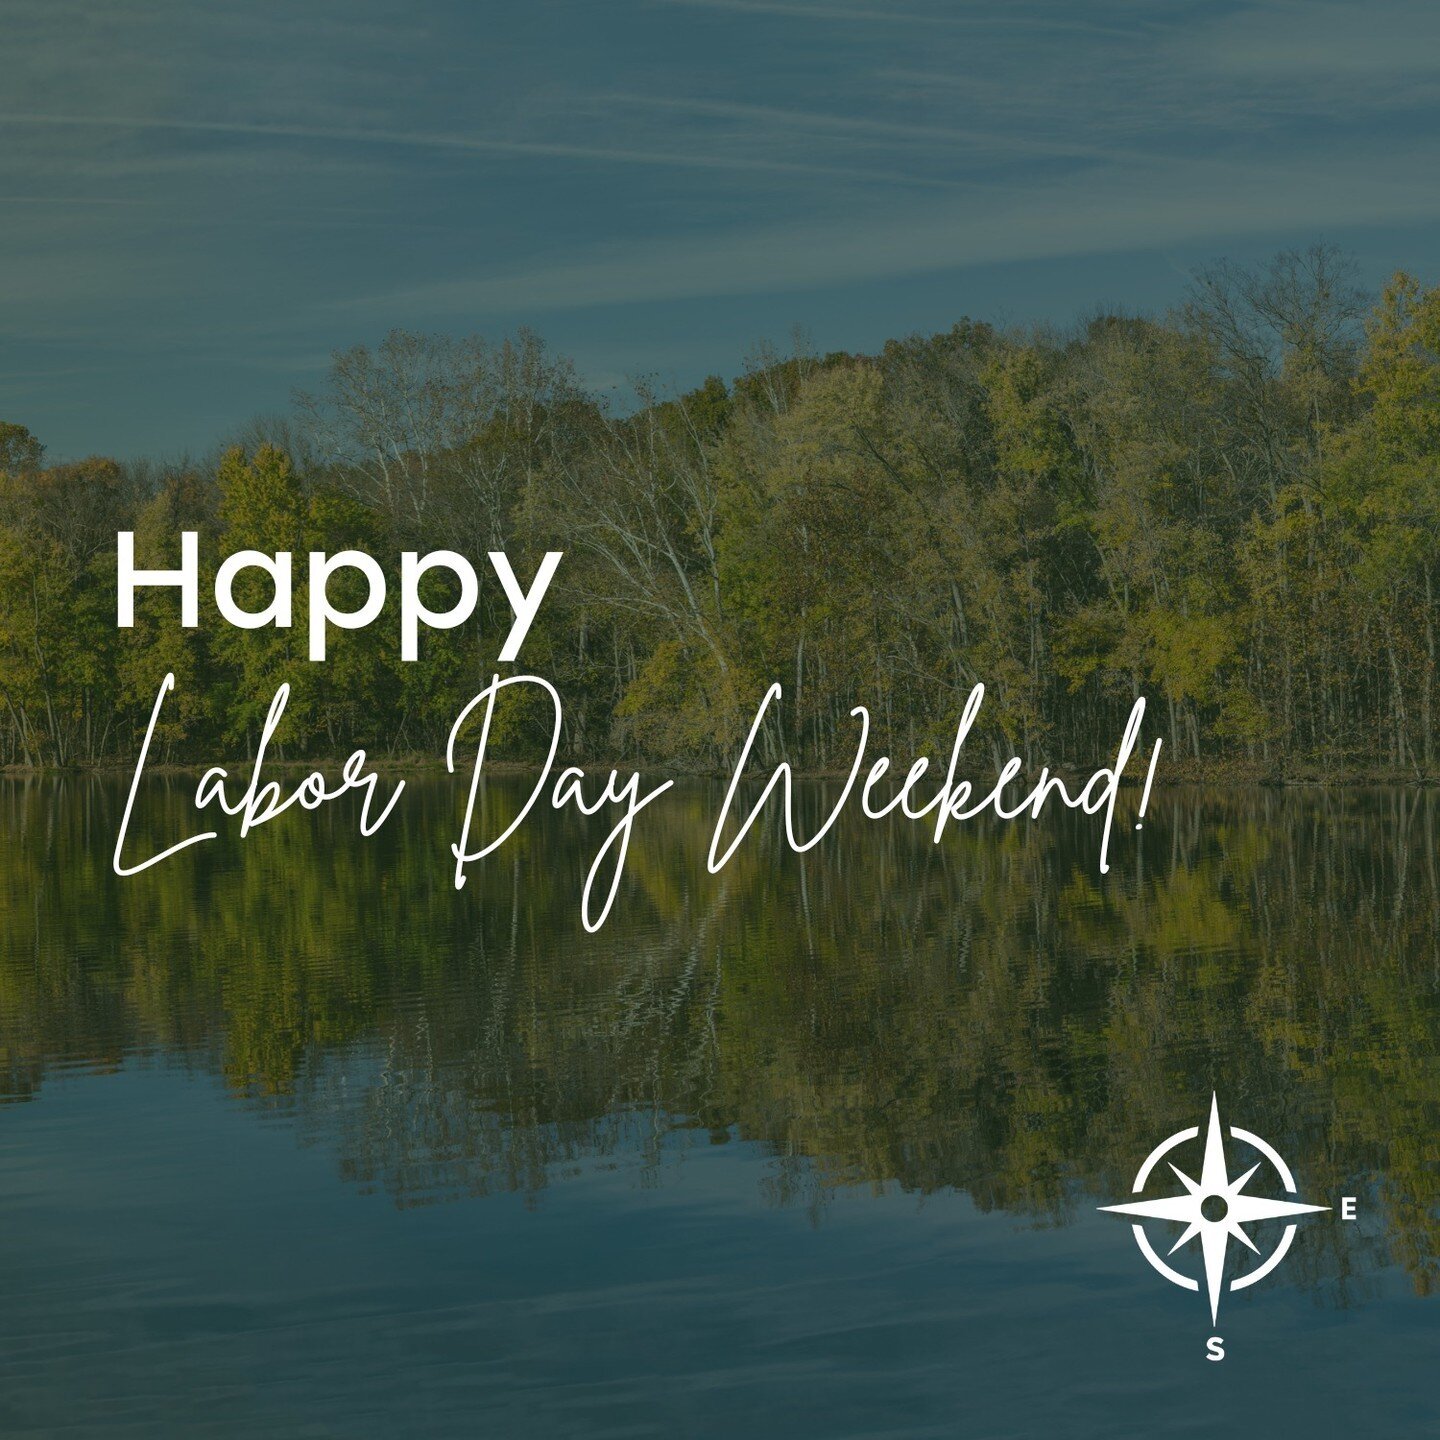 Happy Labor Day weekend from your lovely friends at Southeast! What are you doing this weekend? Let us know in the comments!